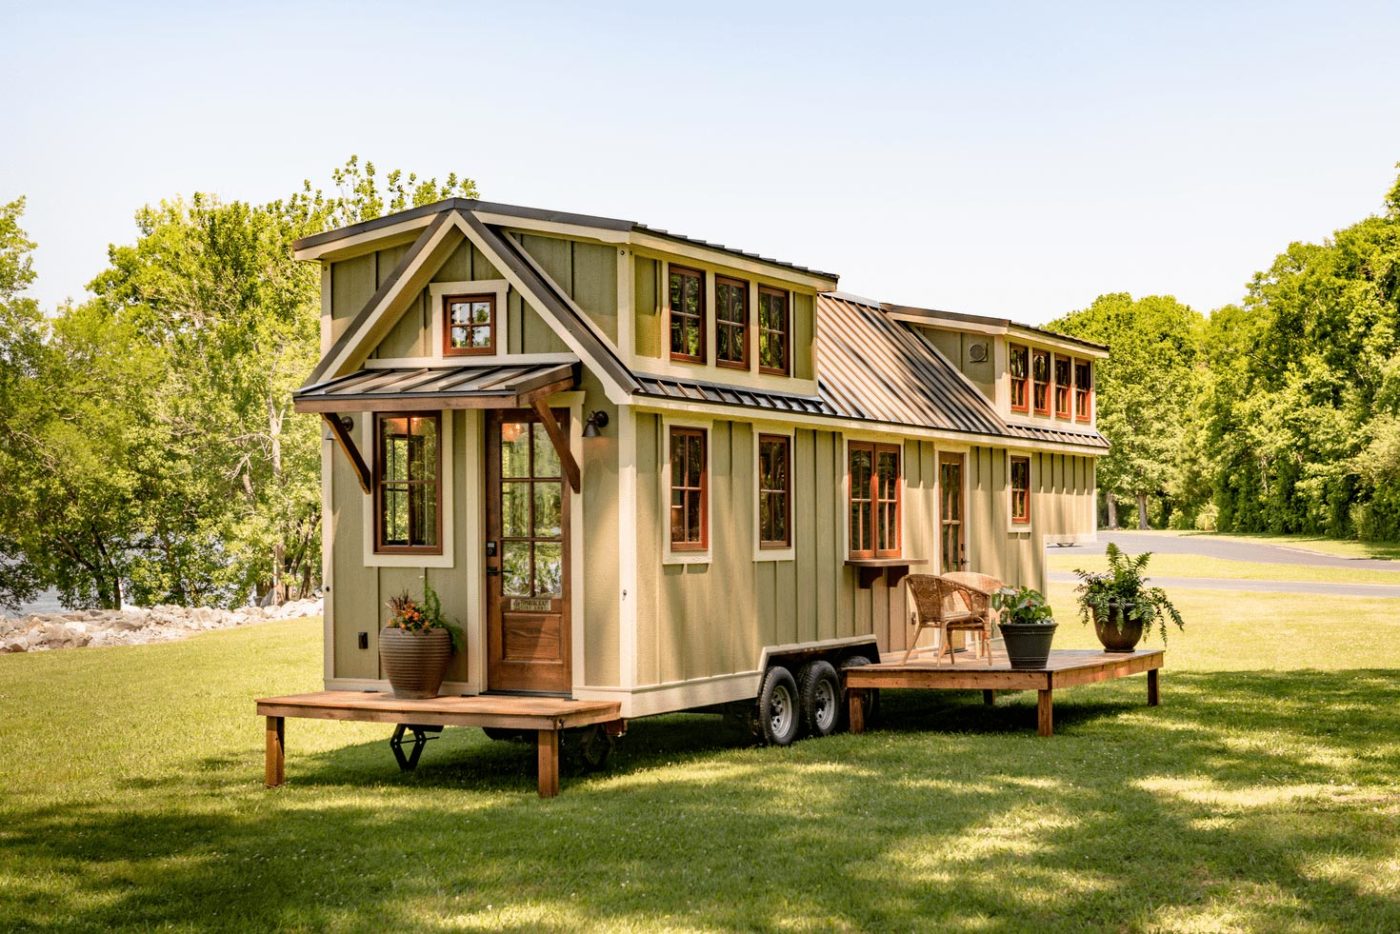 Tiny homes at 2021 Maricopa County Home & Garden Show in Phoenix